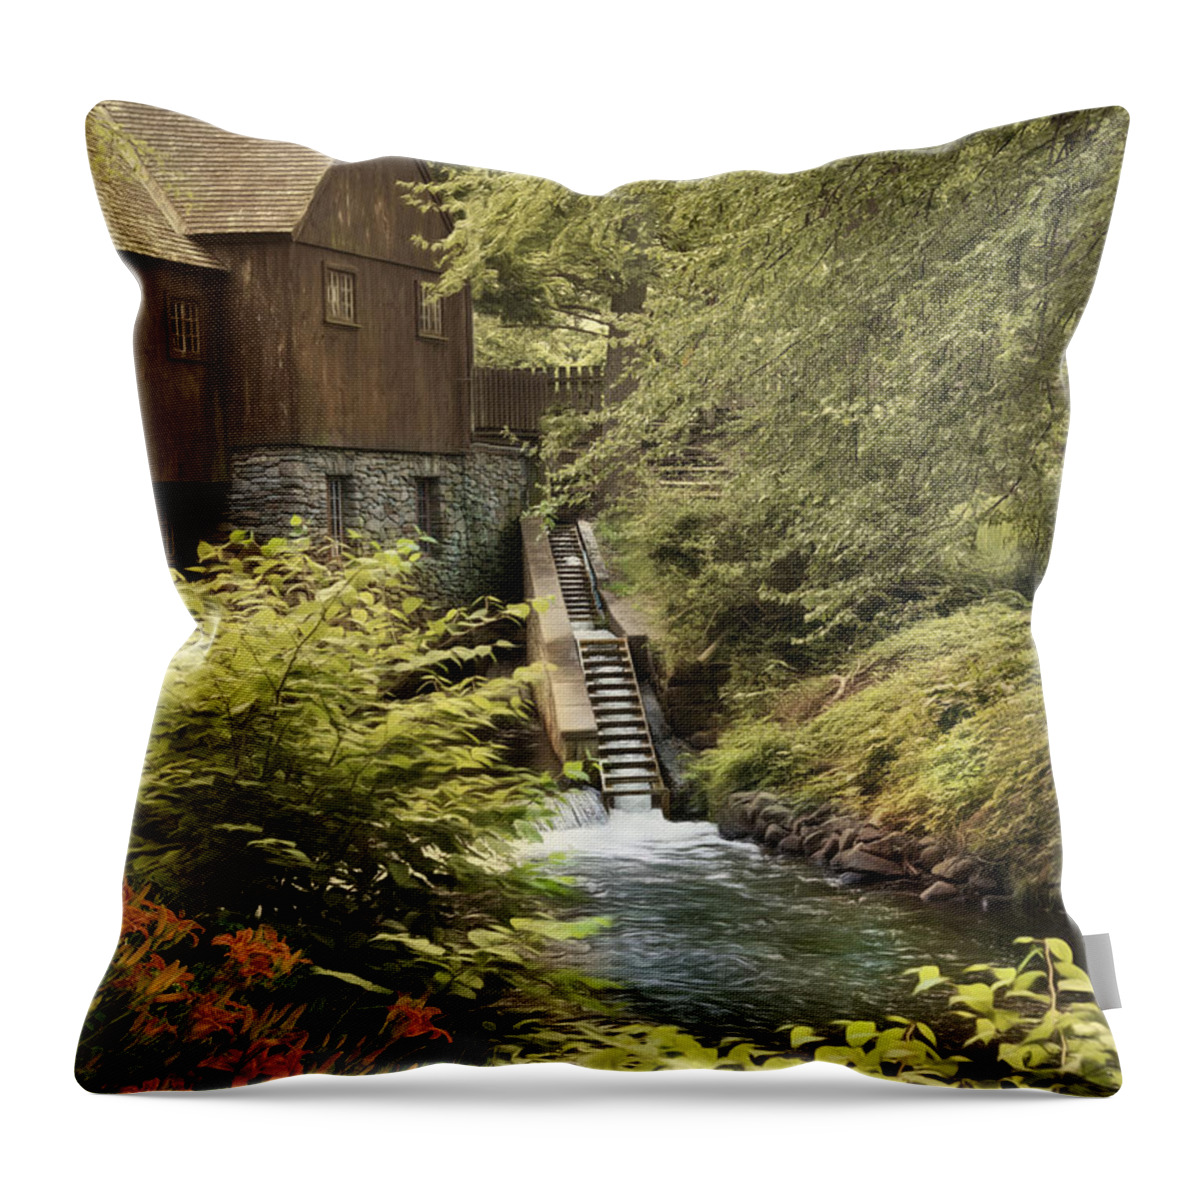 Plymouth Throw Pillow featuring the photograph Plymouth Fish Ladder by Robin-Lee Vieira